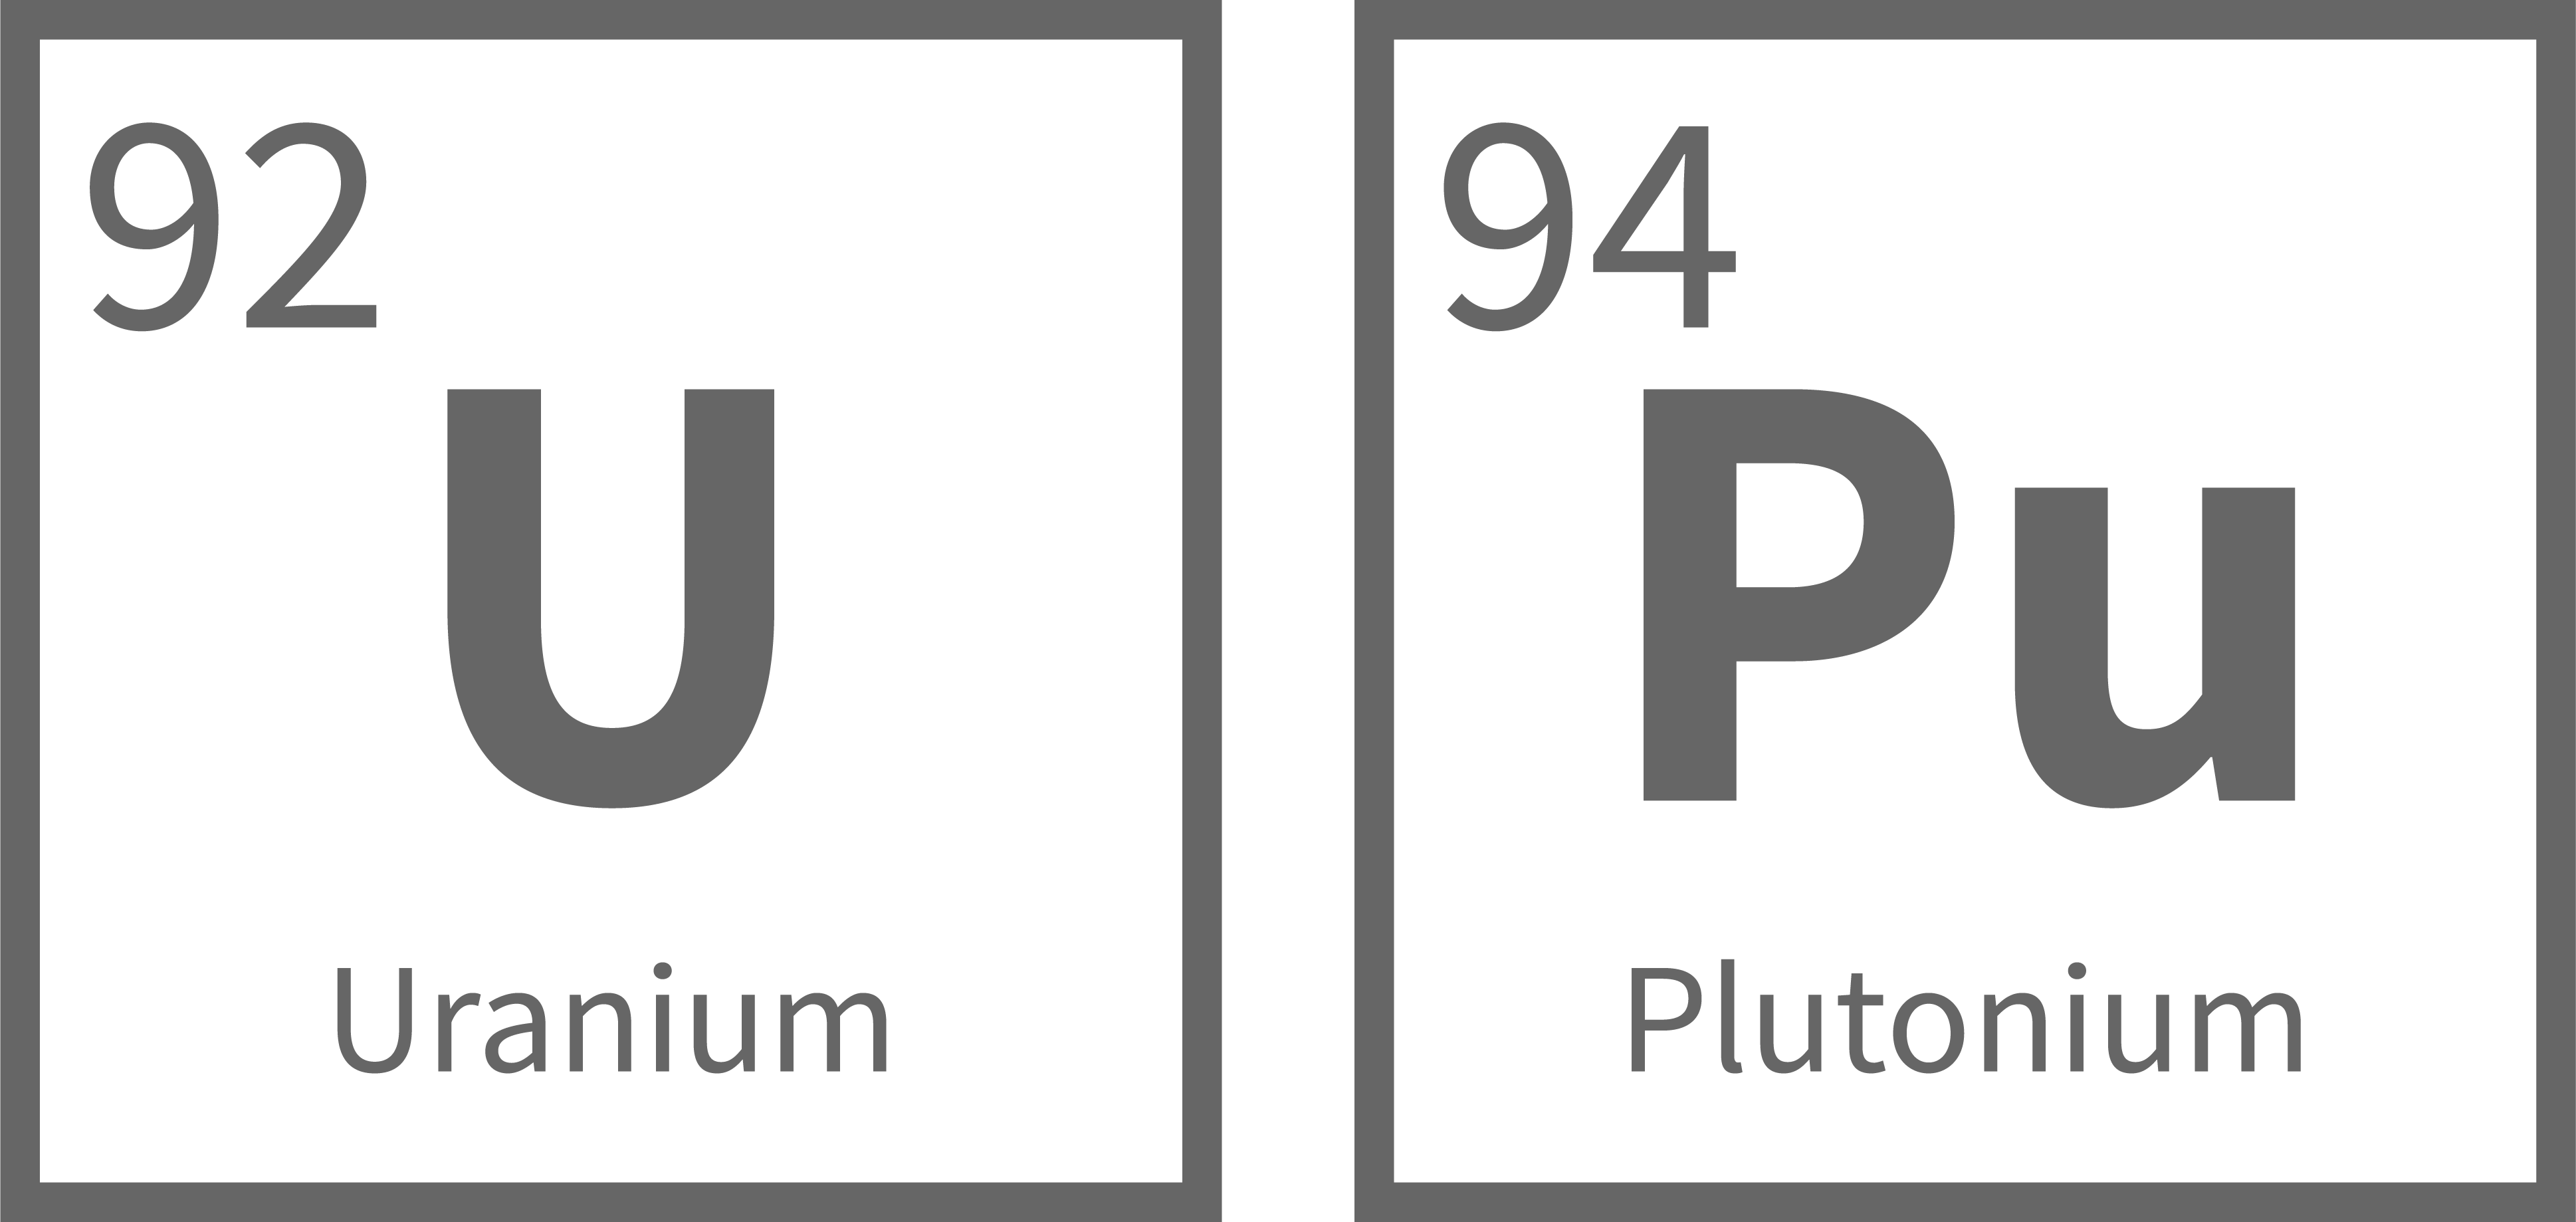 A illustration of two boxes with letters. The first box reads U, Uranium, and 92. The second box reads PU, Plutonium, and 94.